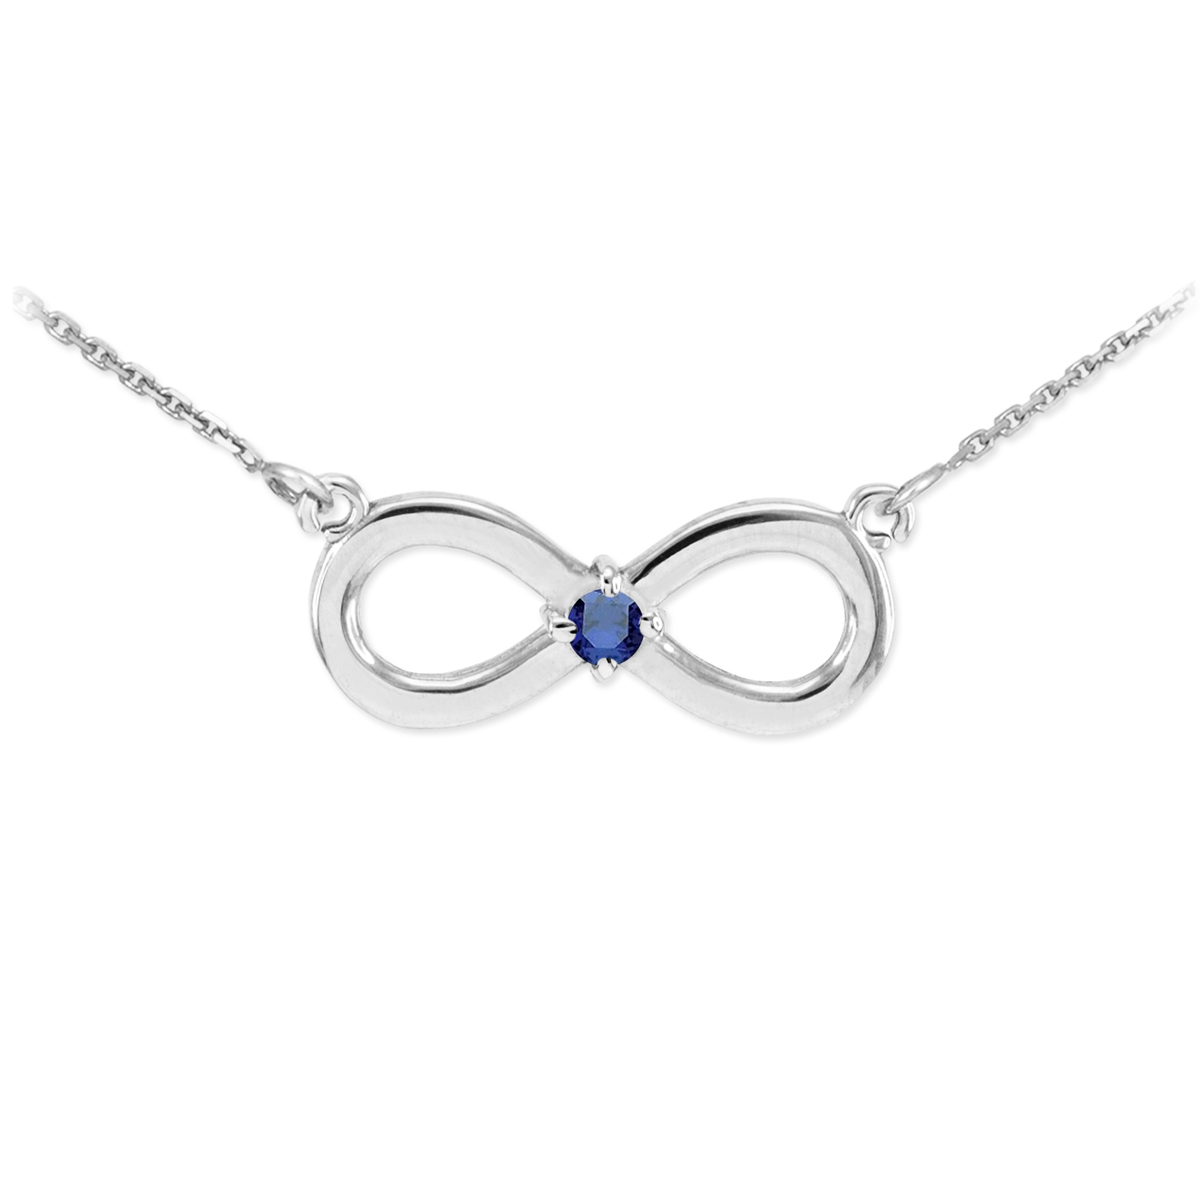 White Gold Infinity Birthstone Necklace